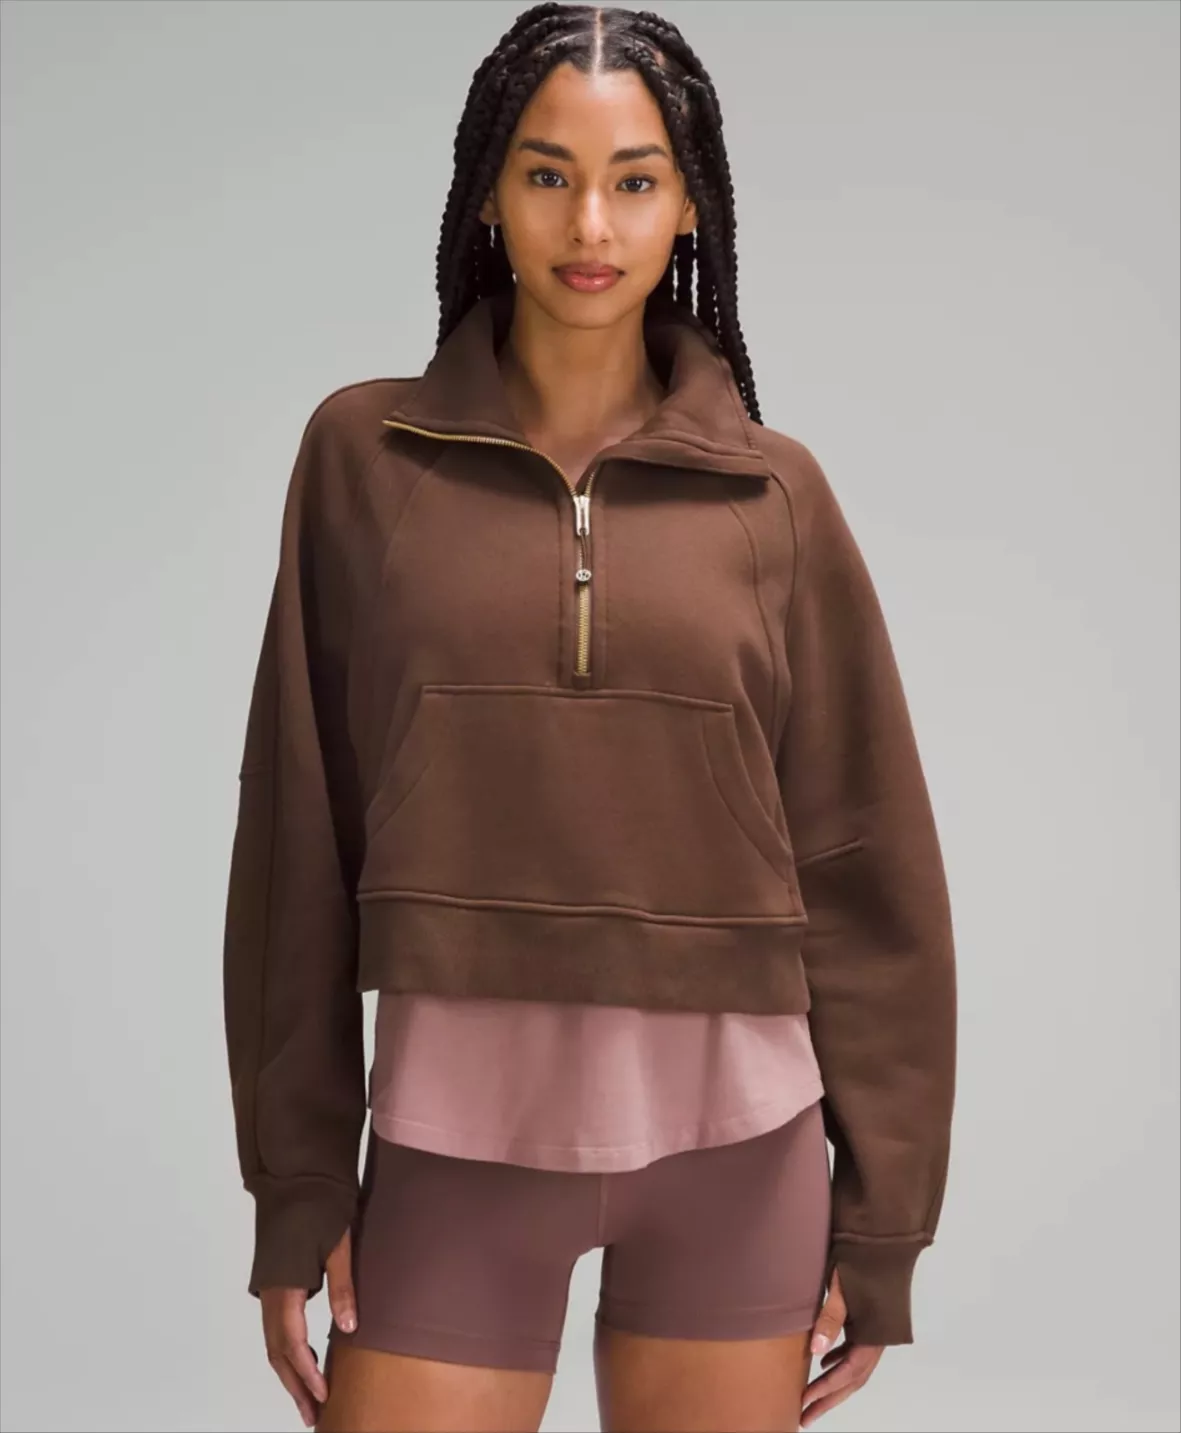 💕NWT LULULEMON Scuba Oversized Zip Hoodie - Size XS/S Date Brown Sold Out !